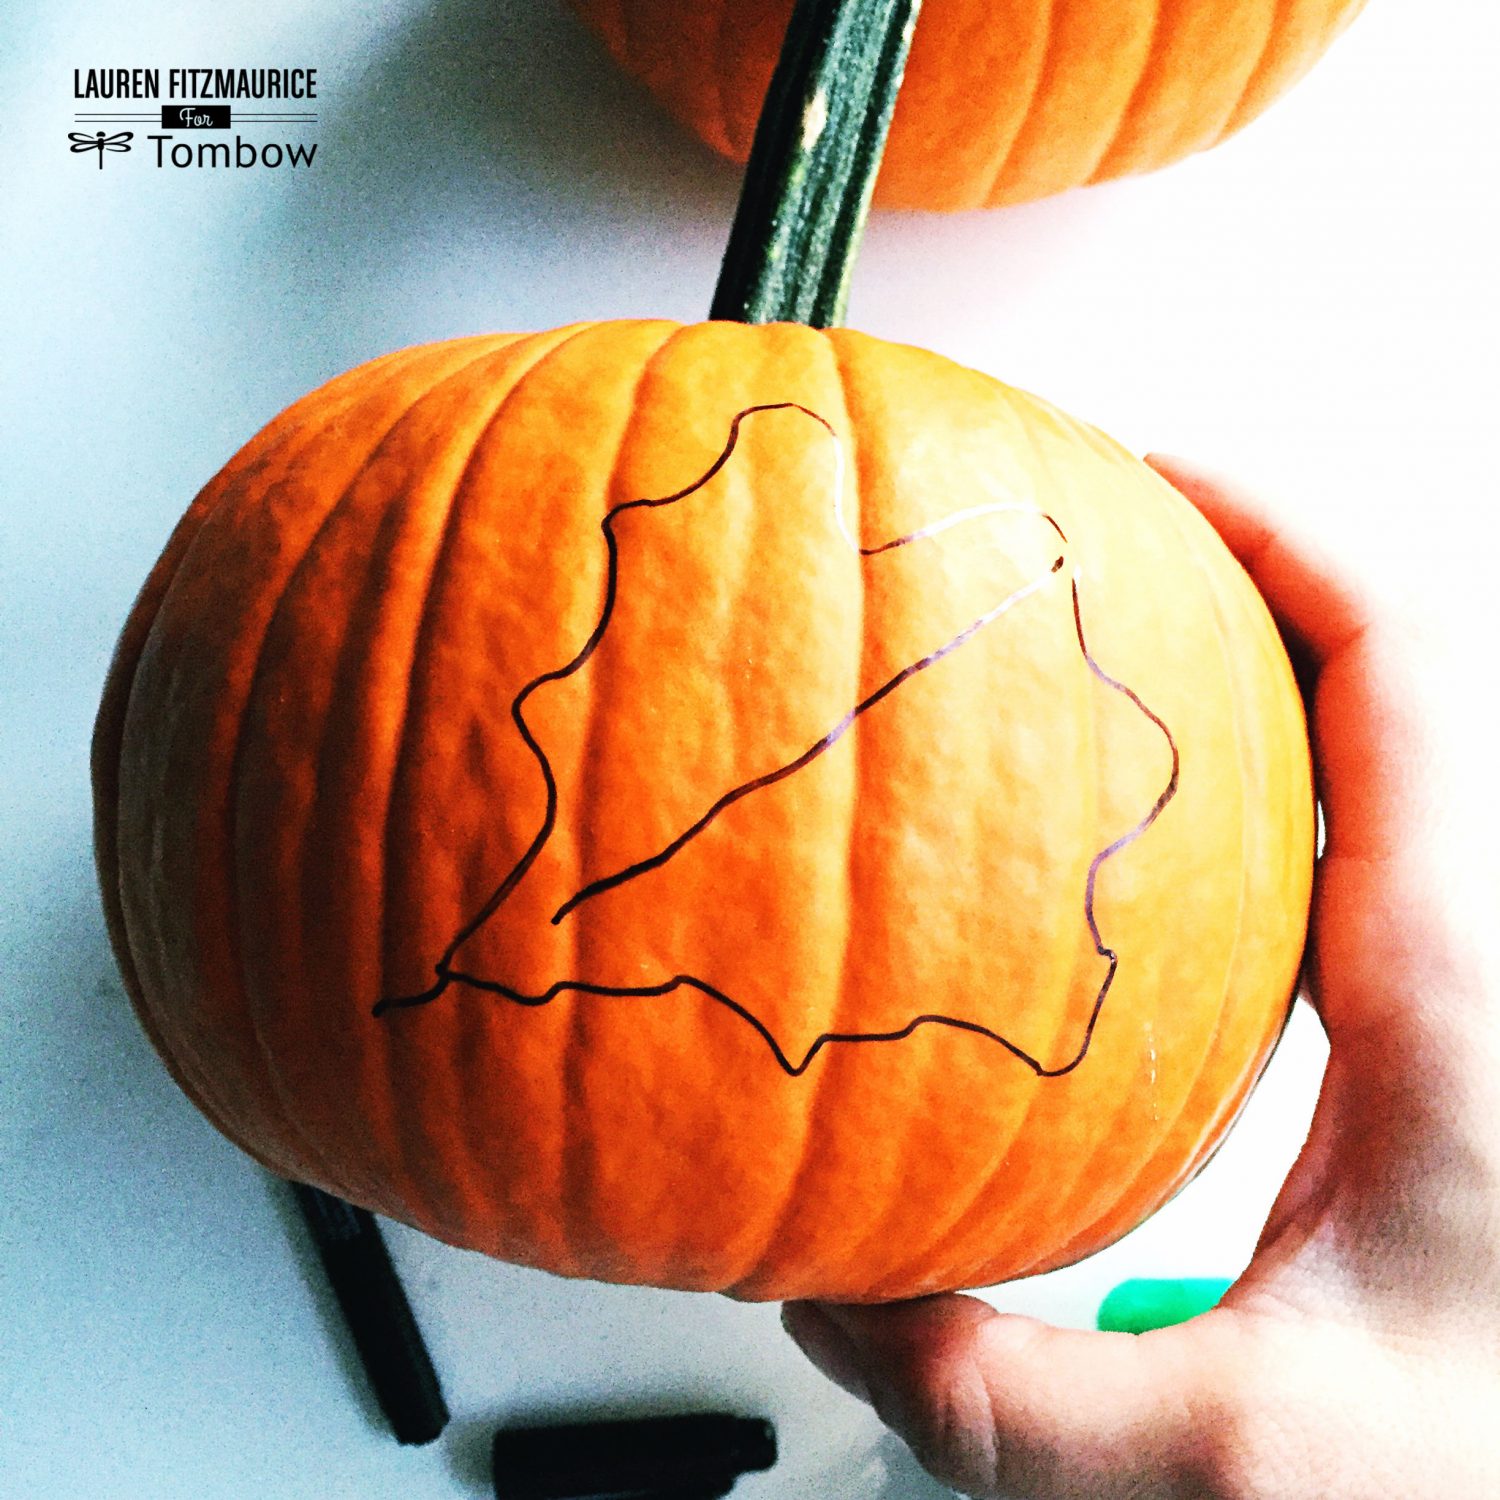 pretty pumpkins with tombow